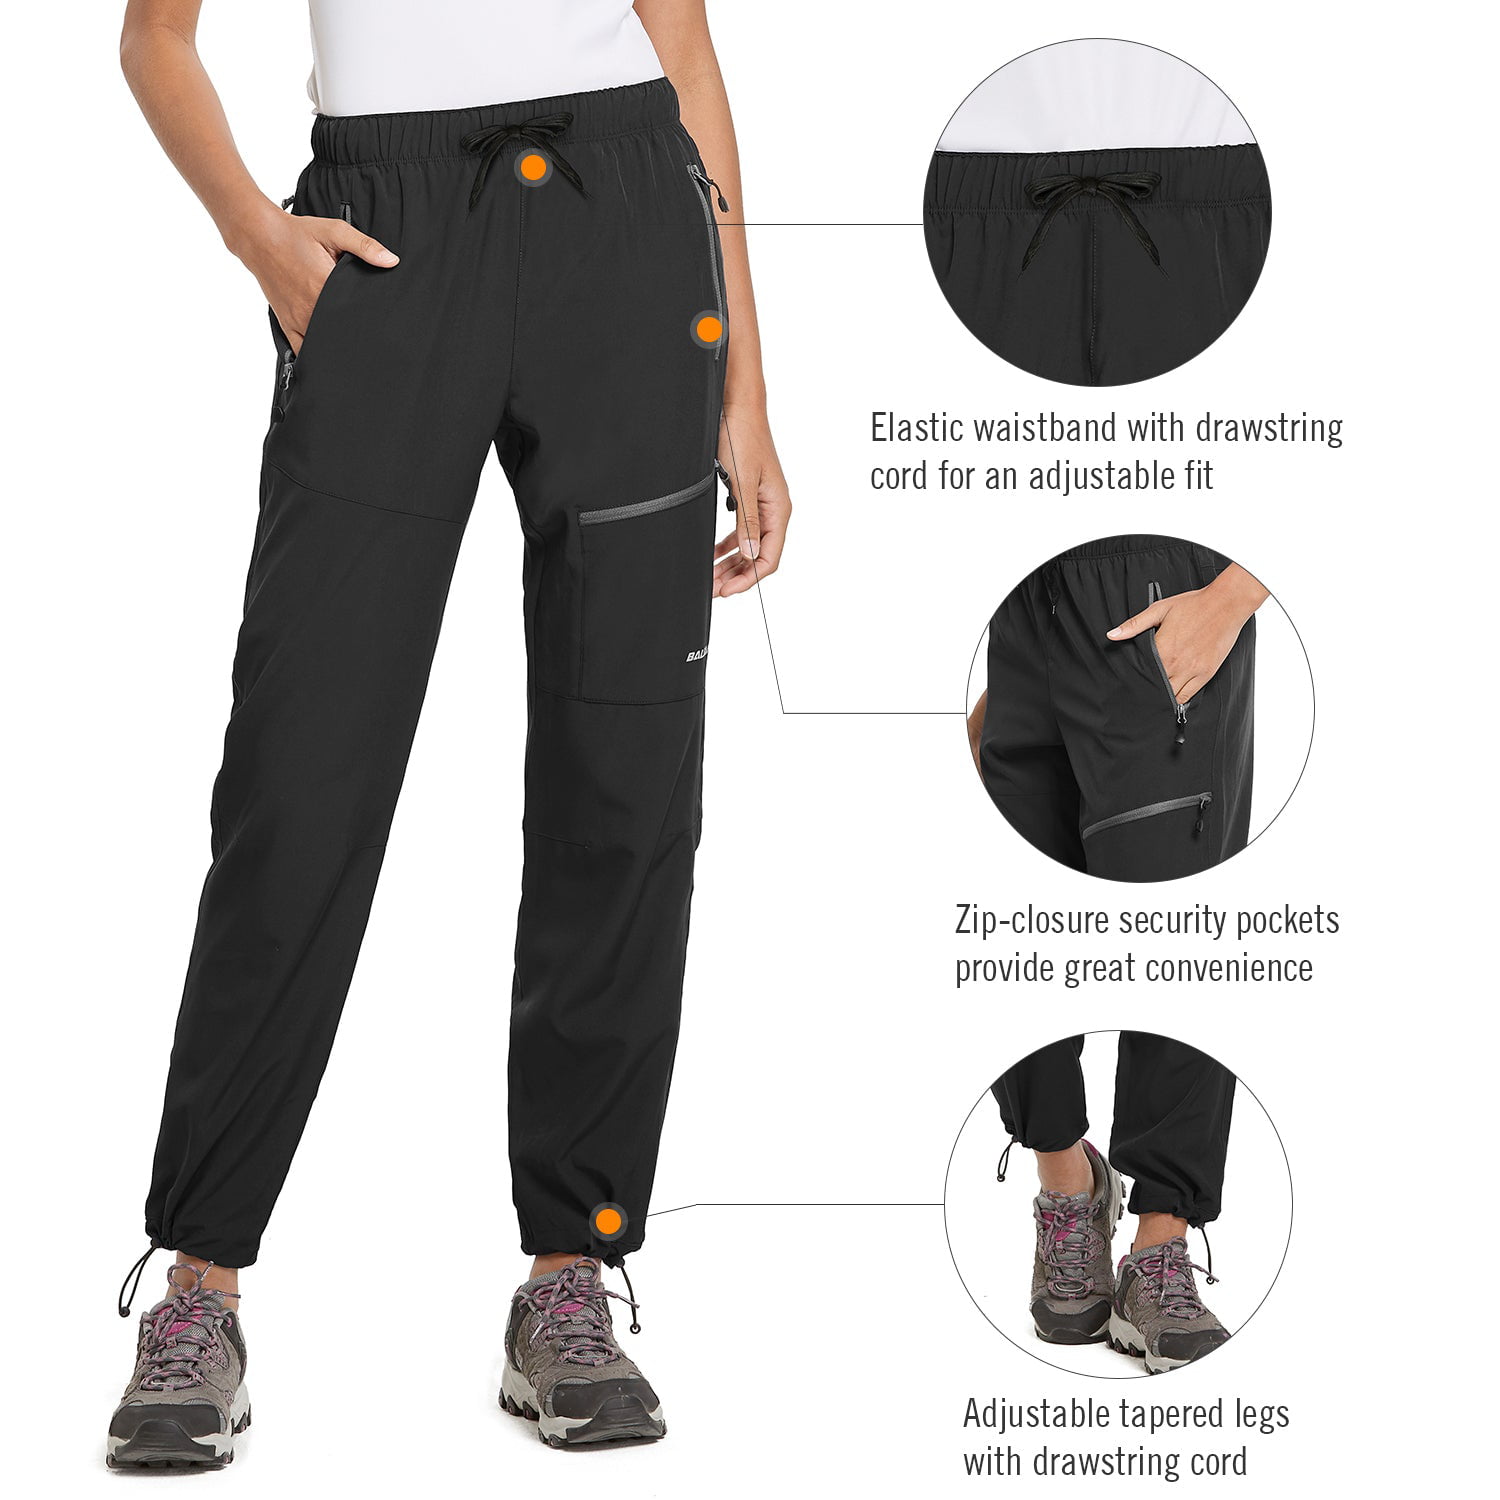  BALEAF Women's Convertible Pants, Quick Dry Hiking Joggers,  Water Resistant Jogger Pants with Zipper Pockets, Lightweight High Waistd  Cargo Joggers Travel Camping Work Pants Black XS : Clothing, Shoes & Jewelry